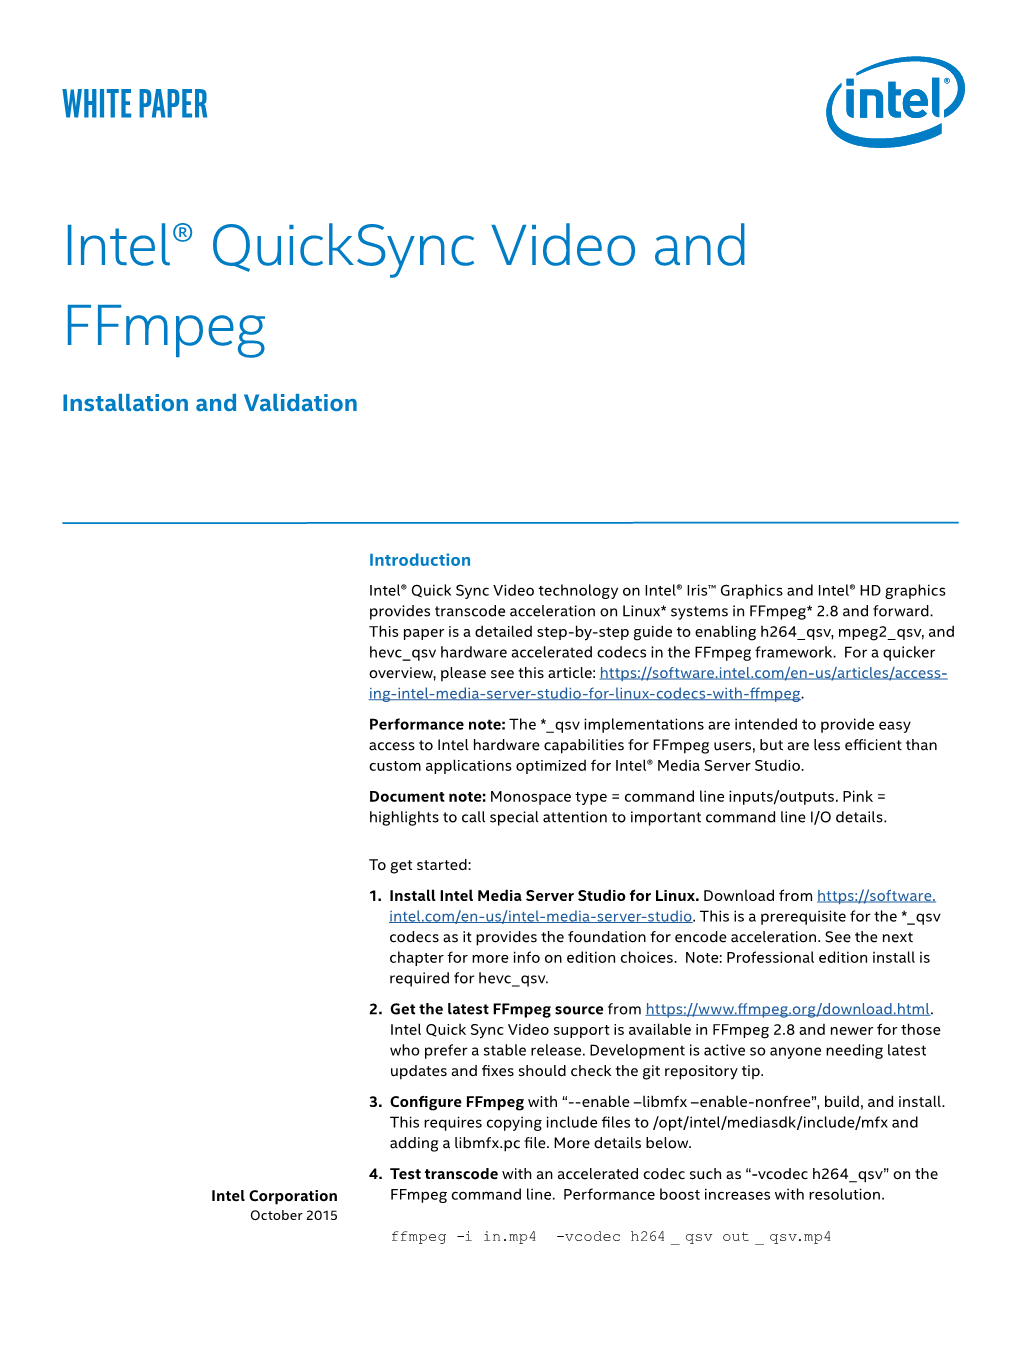 Intel® Quick Sync Video and Ffmpeg Installation and Validation